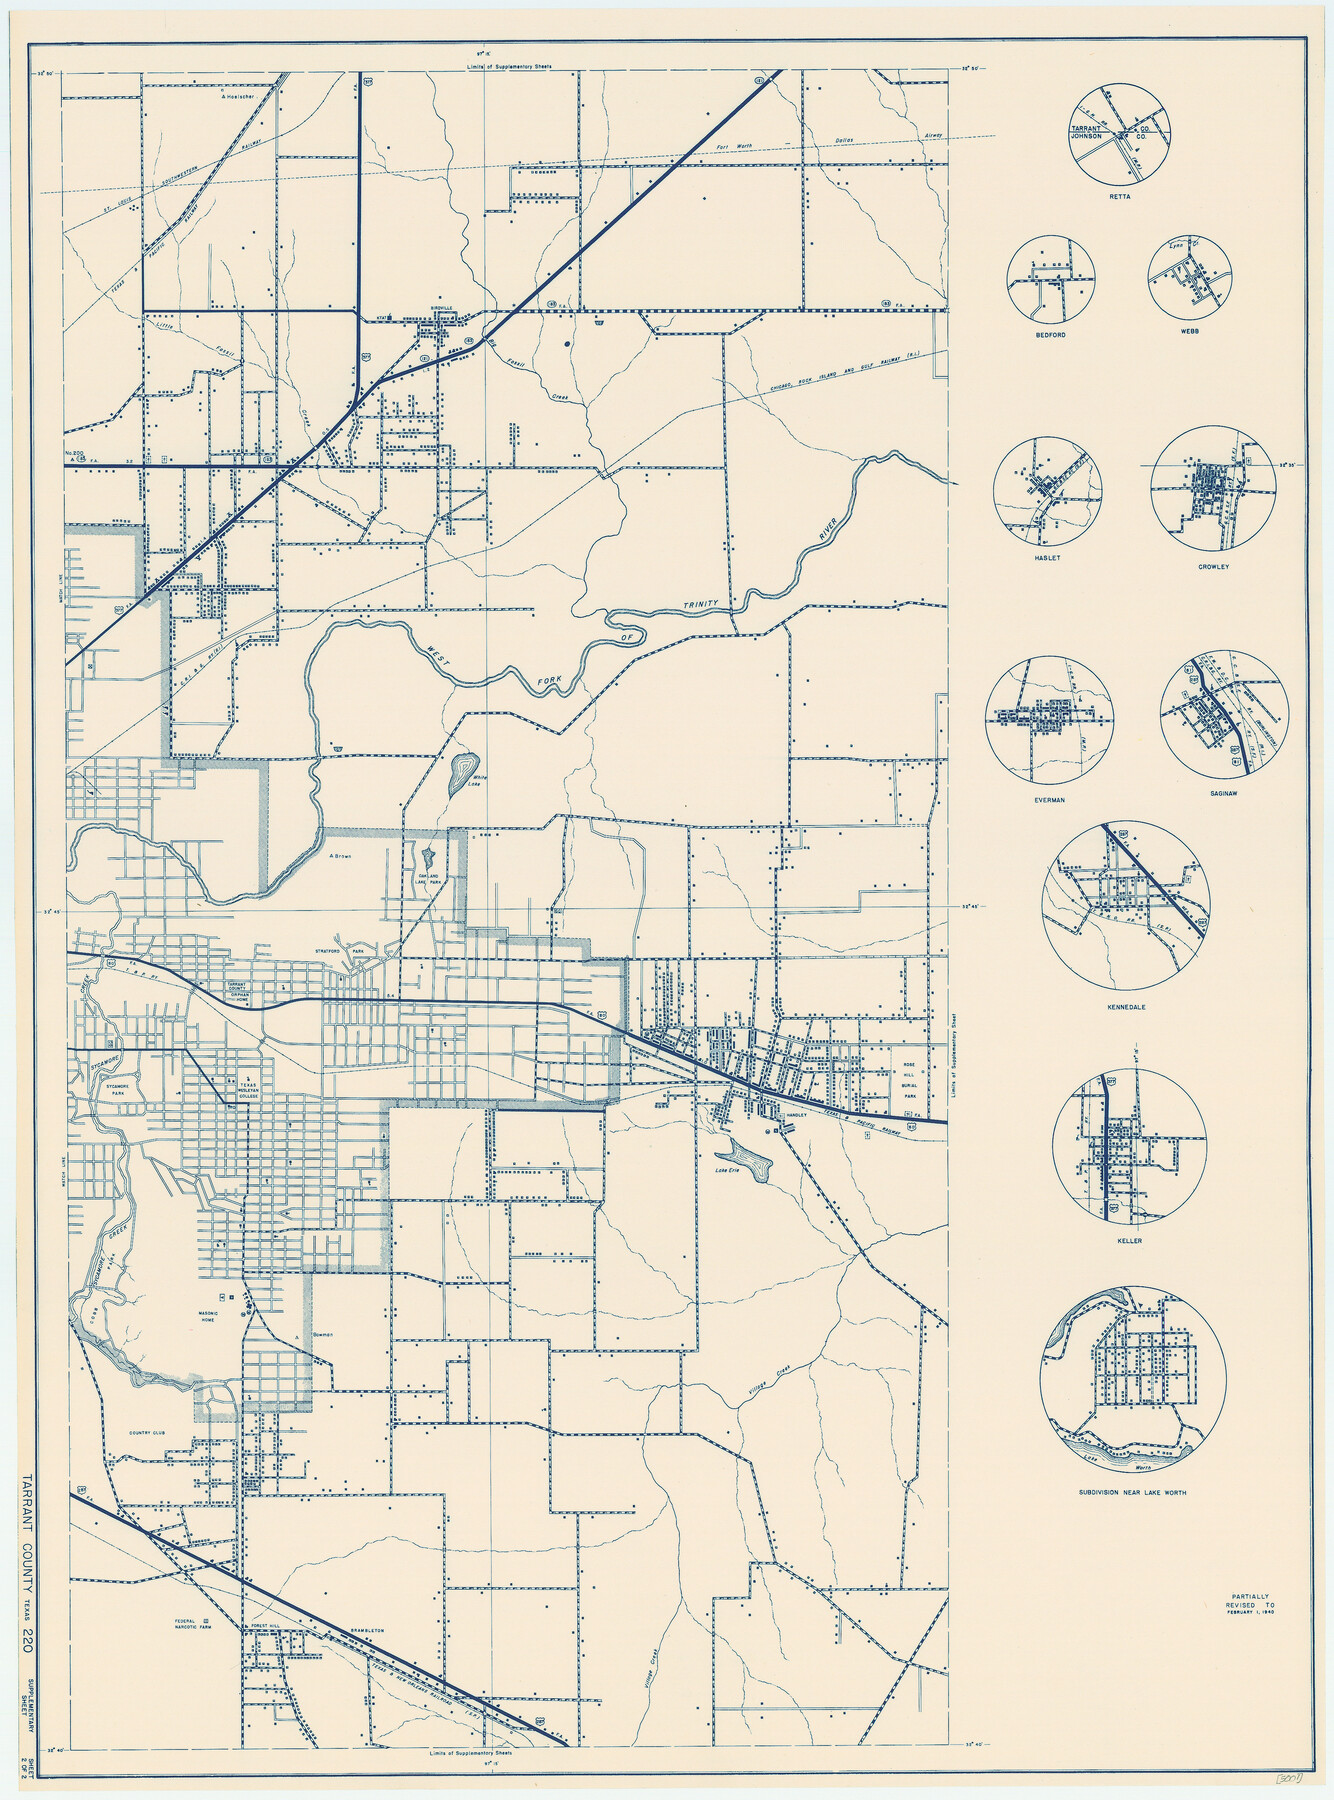 79253, General Highway Map.  Detail of Cities and Towns in Tarrant County, Texas [Fort Worth and vicinity], Texas State Library and Archives